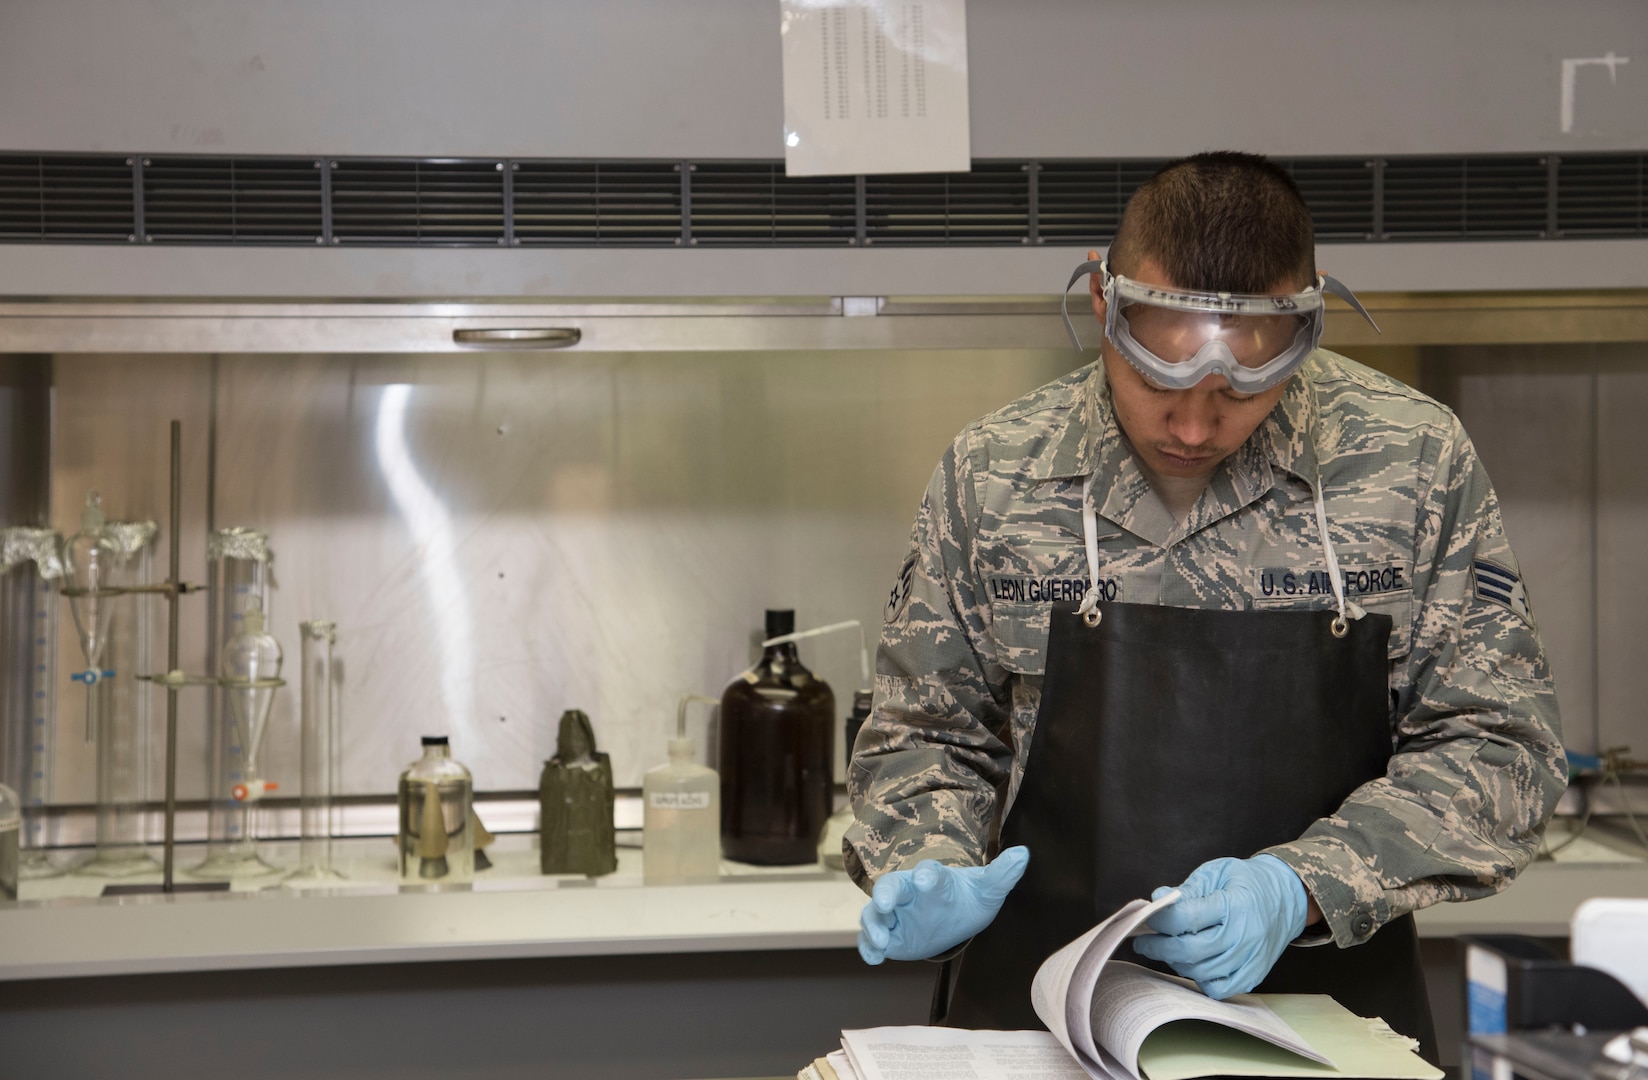 U.S. Air Force Senior Airman Ken Leon Guerrero, a fuels laboratory technician with the 35th Logistics Readiness Squadron, looks at previous fuel records at Misawa Air Base, Japan, March 6, 2017. Fuels technicians perform checks twice a day, ensuring the quality of the fuel is not contaminated. Without fuel, jets could not assist in enhancing our presence in the region by strategically distributing our posture over a wider geographic range. (U.S. Air Force photo by Airman 1st Class Sadie Colbert)